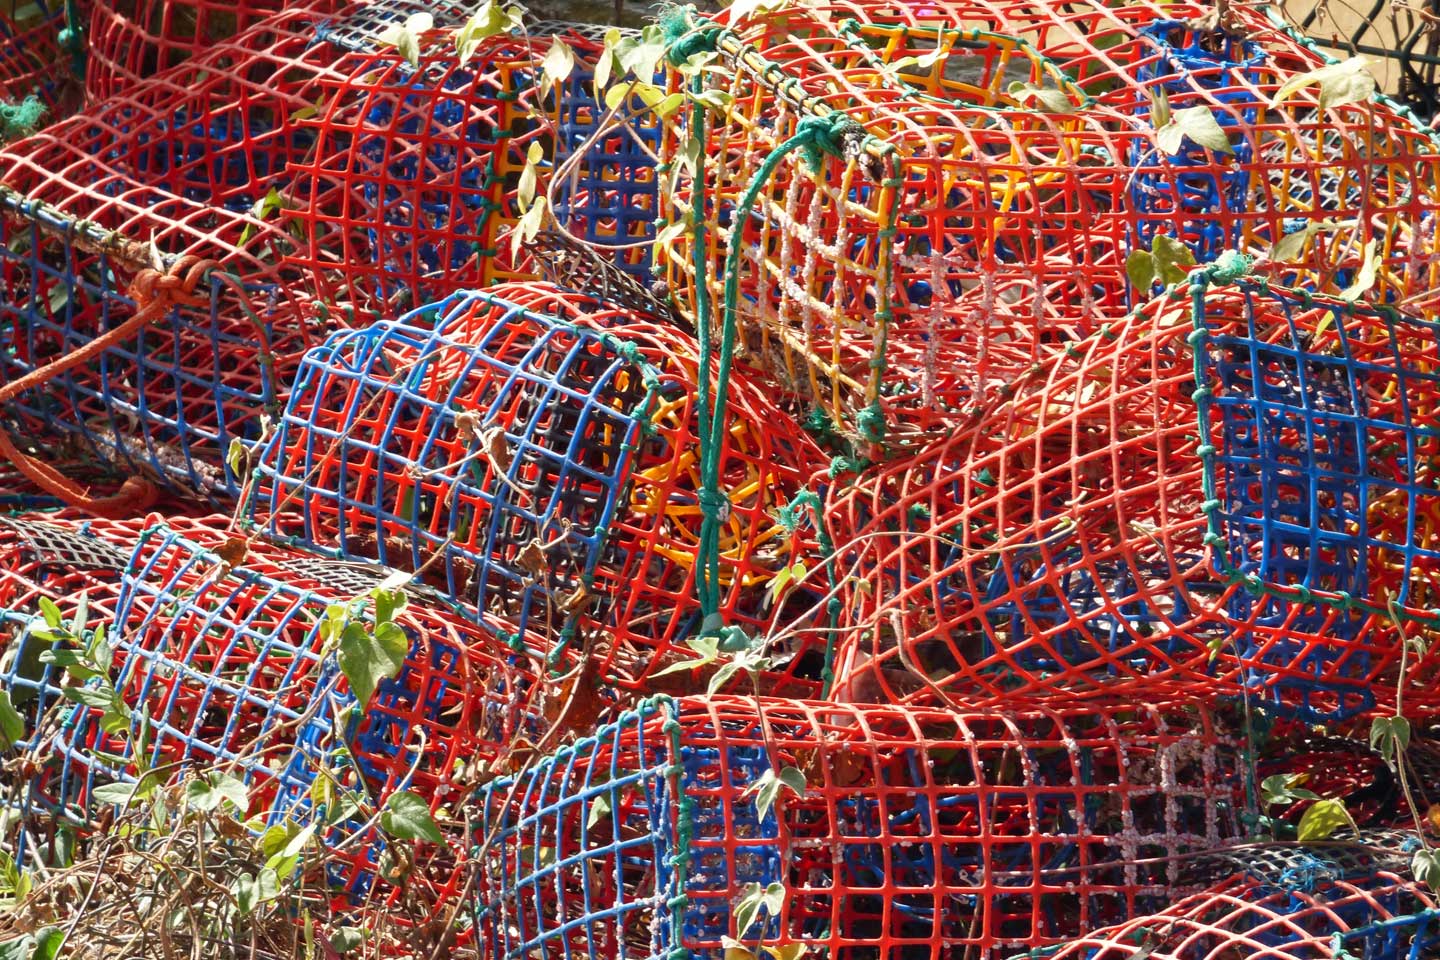 A Photo of crab traps lying neglected in a pile